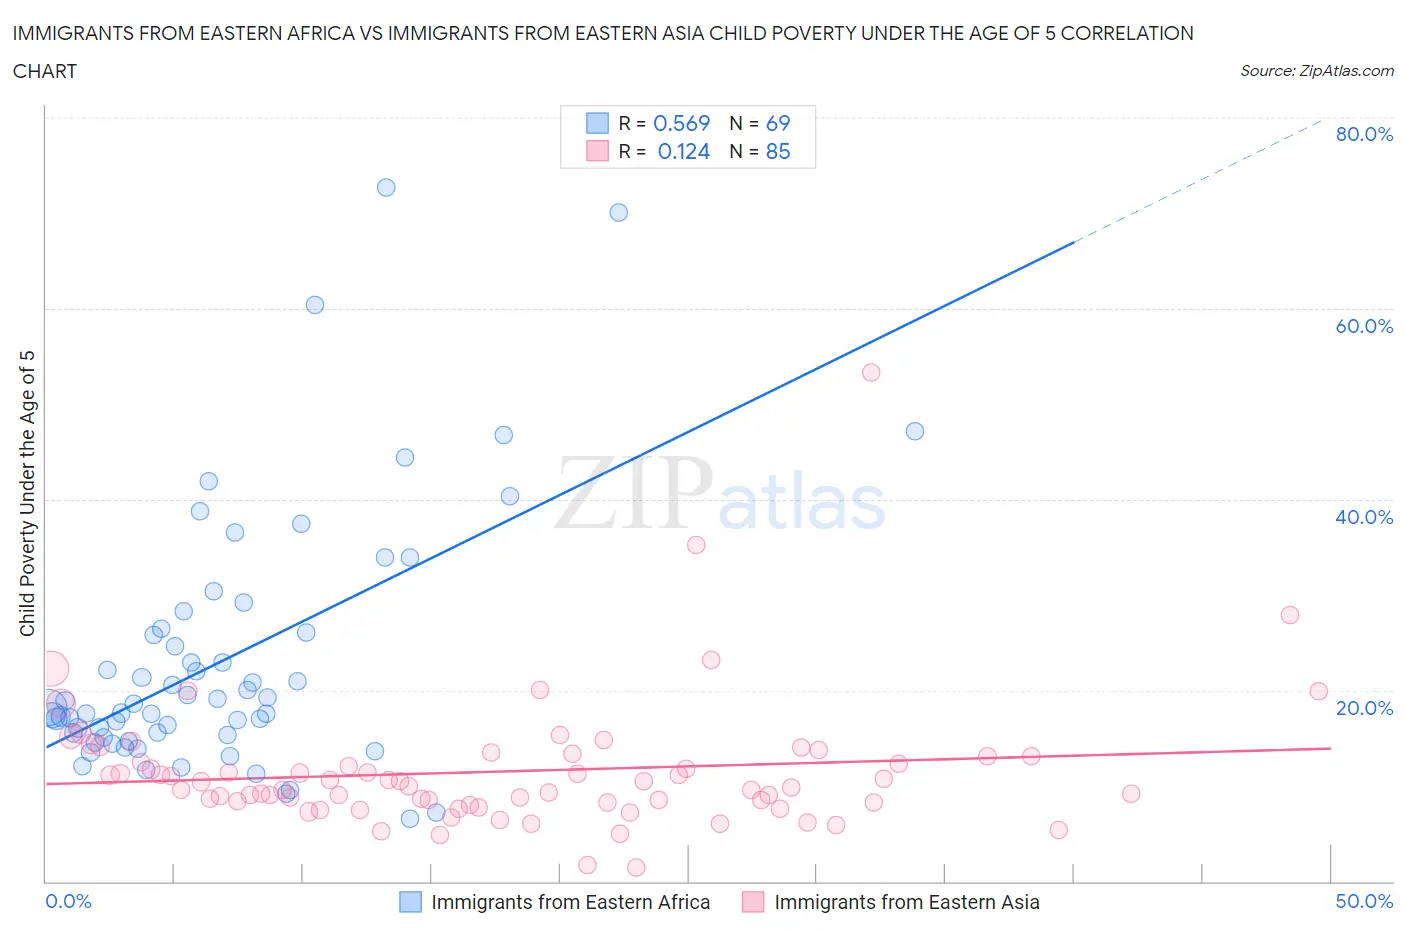 Immigrants from Eastern Africa vs Immigrants from Eastern Asia Child Poverty Under the Age of 5